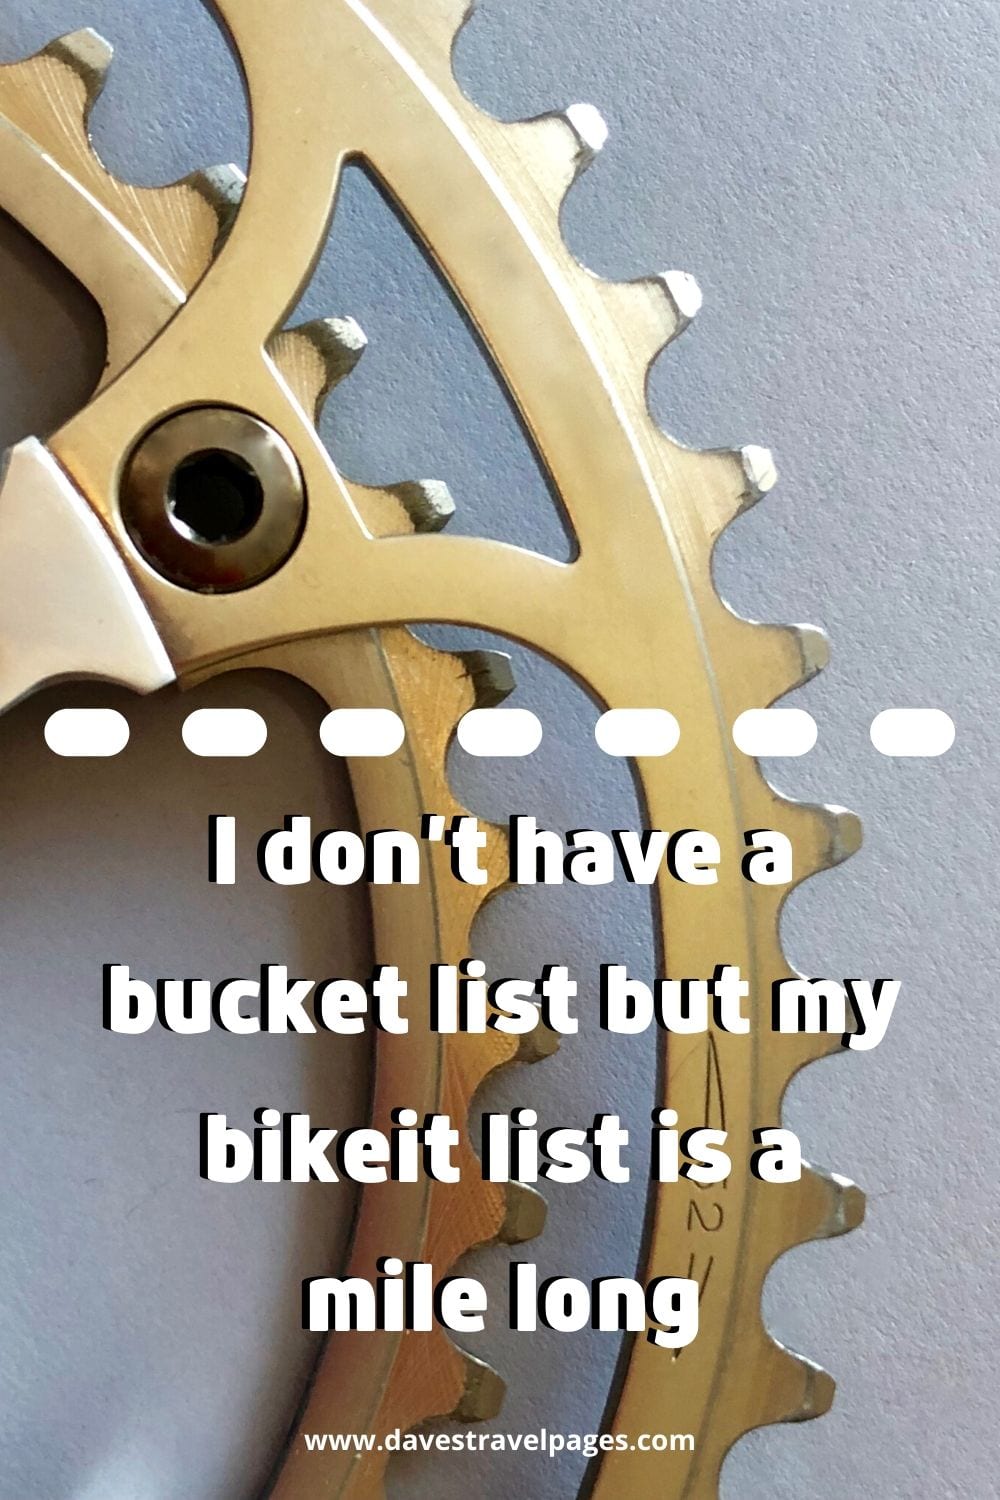 Funny bike quote - I don’t have a bucket list but my bikeit list is a mile long.